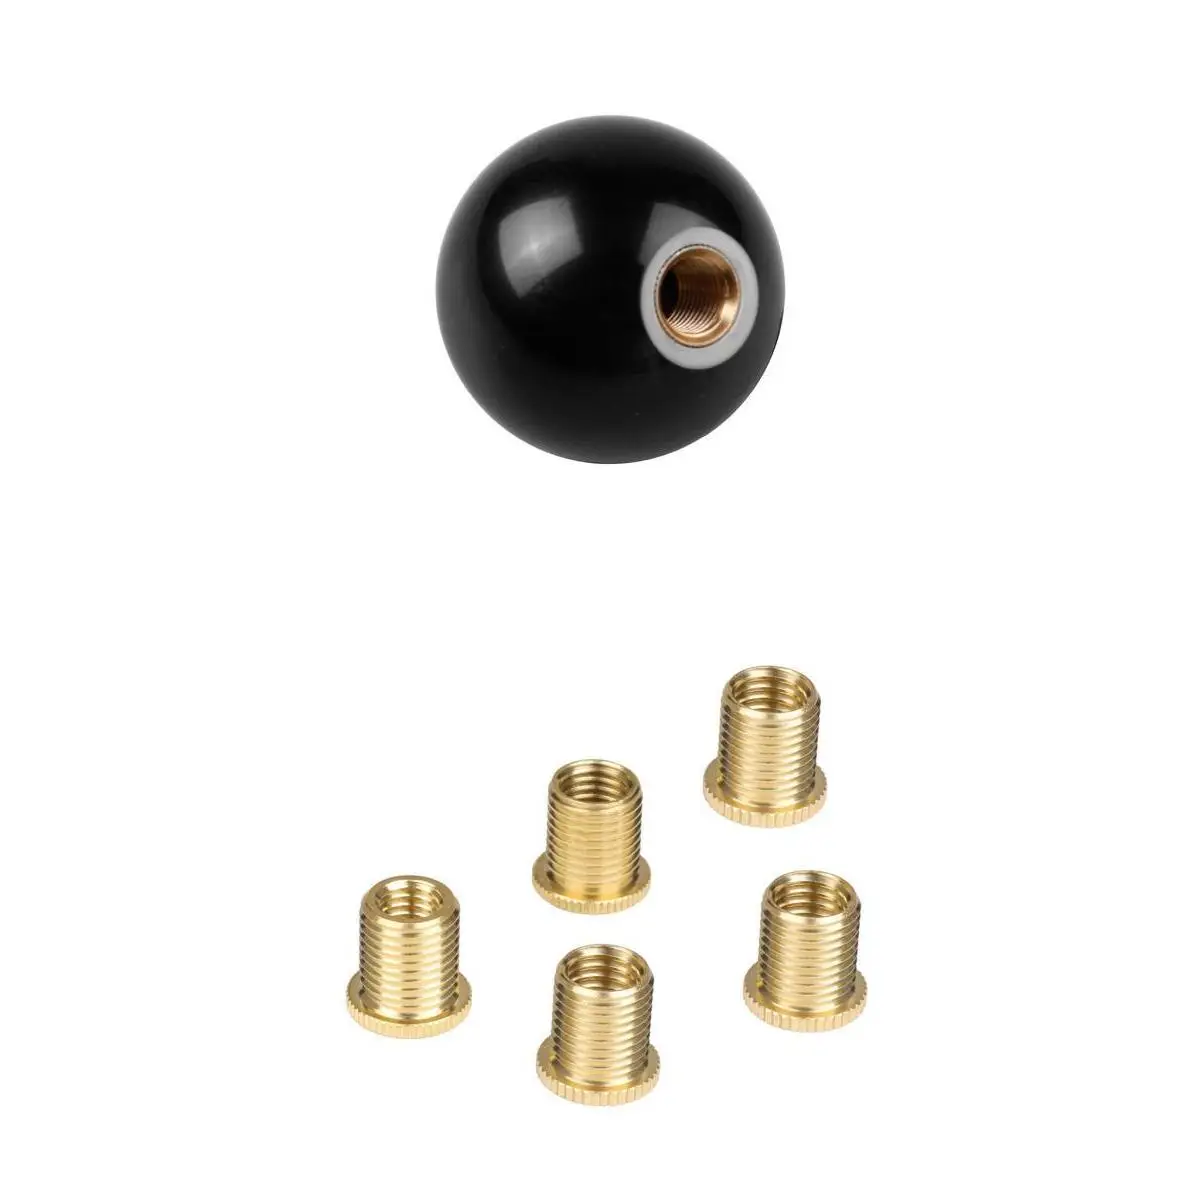 Black 8 Ball M12X1.25 Shift Knob Shifter Lever Selector With M10x1.5 Nuts